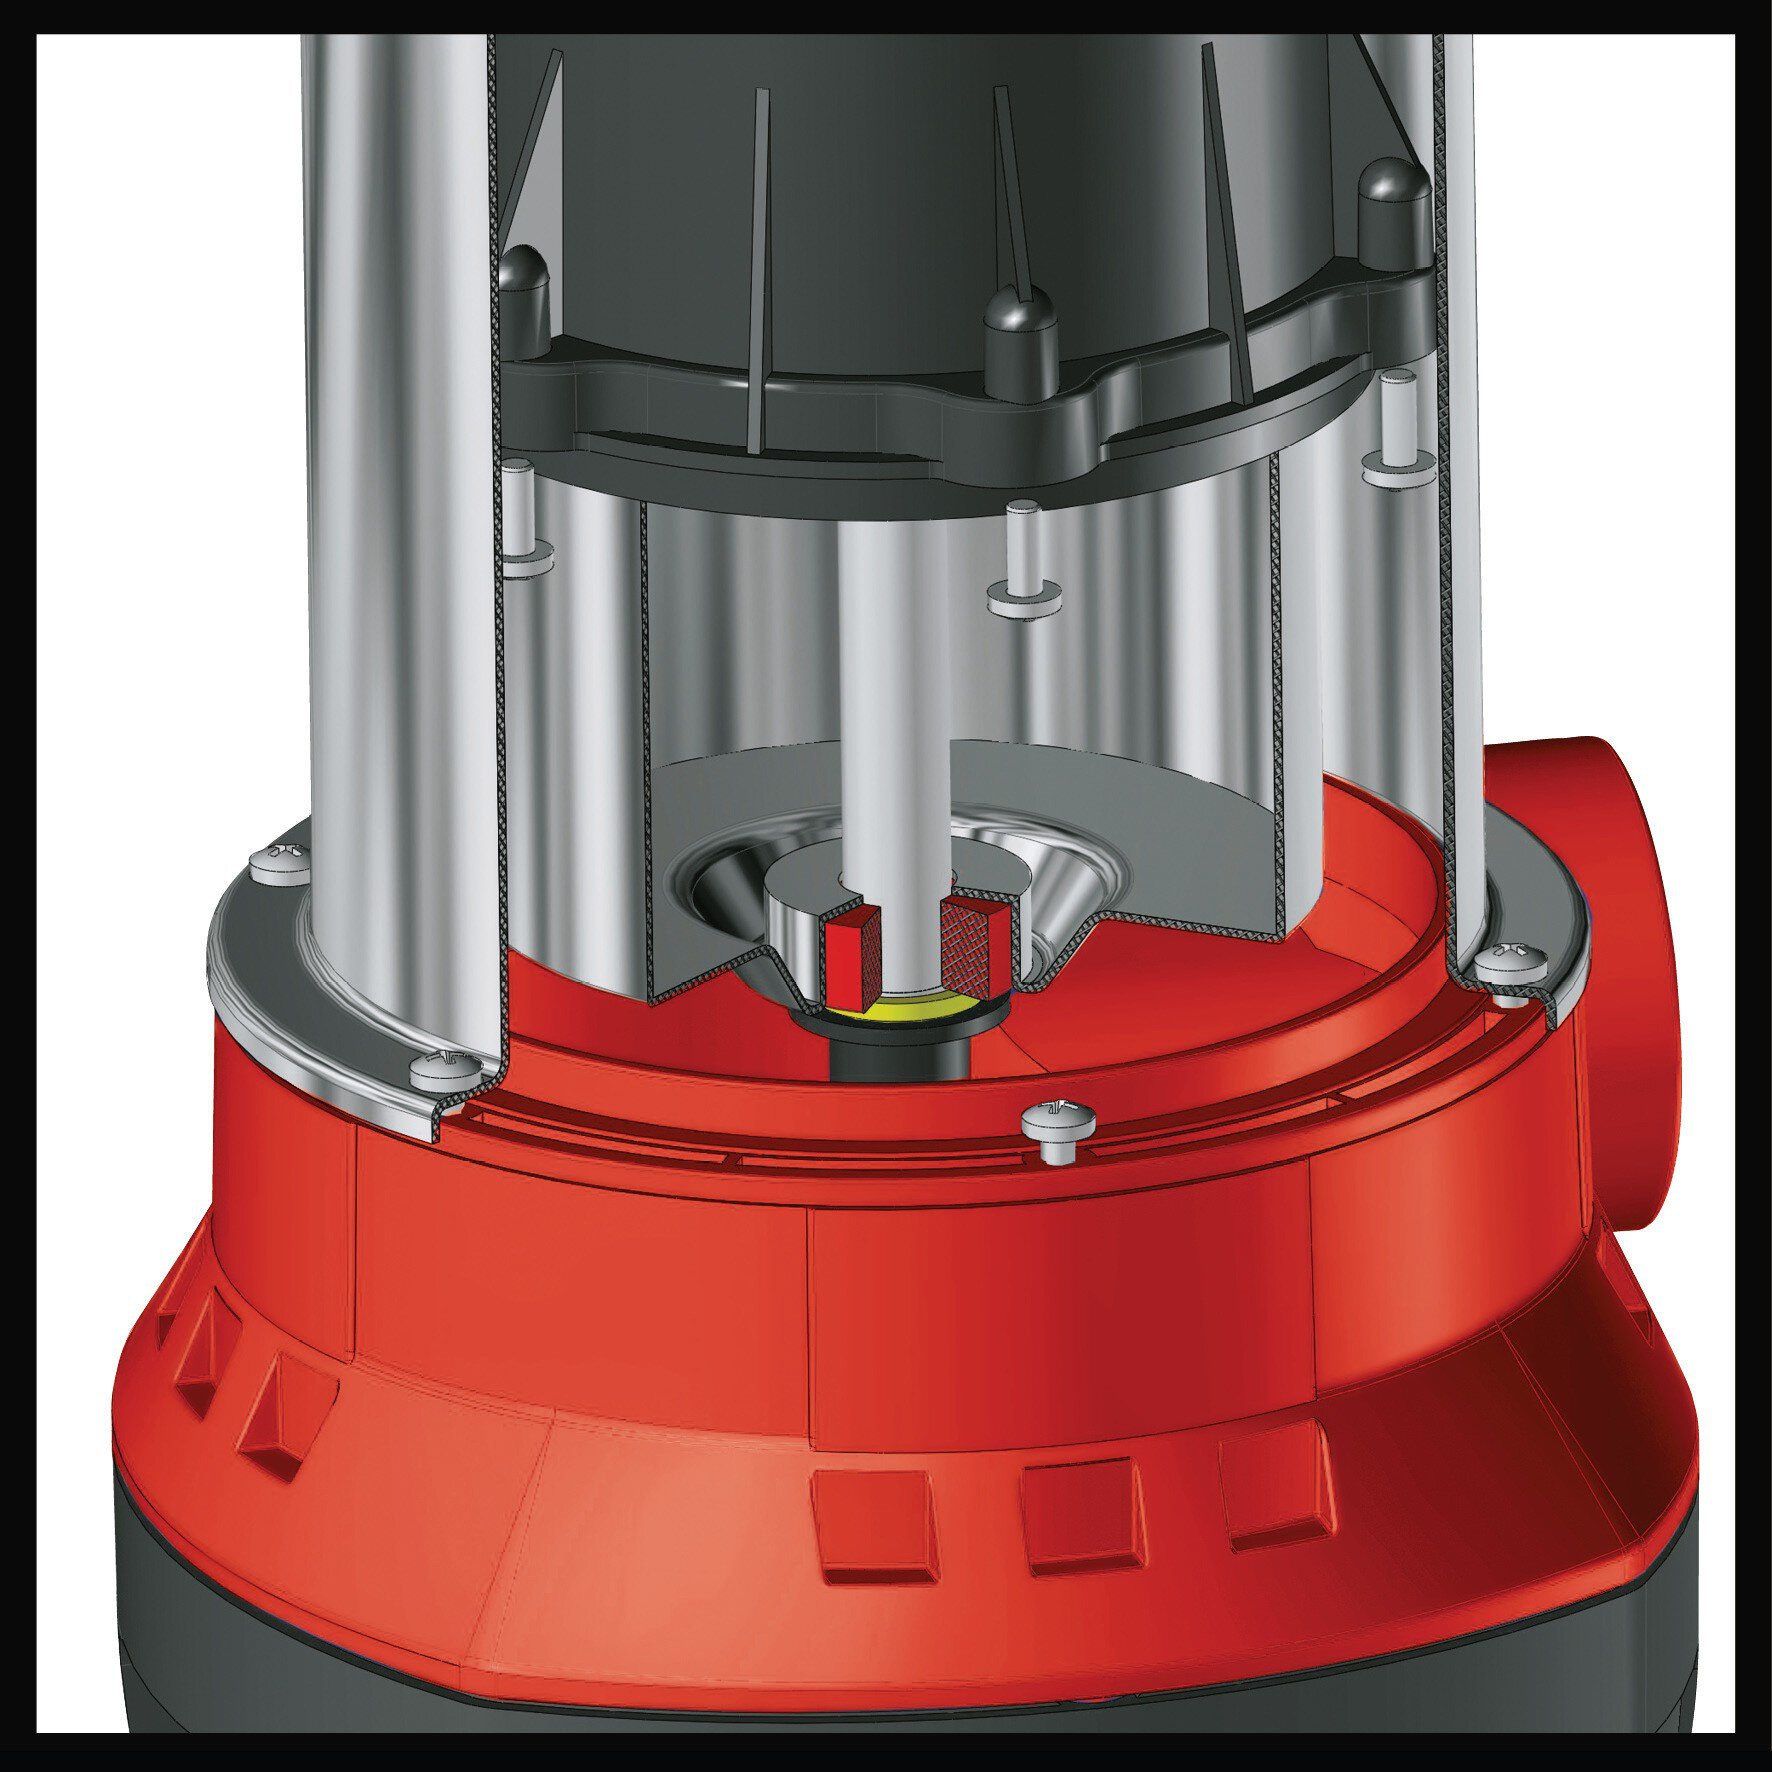 einhell-classic-submersible-pump-4170445-detail_image-003